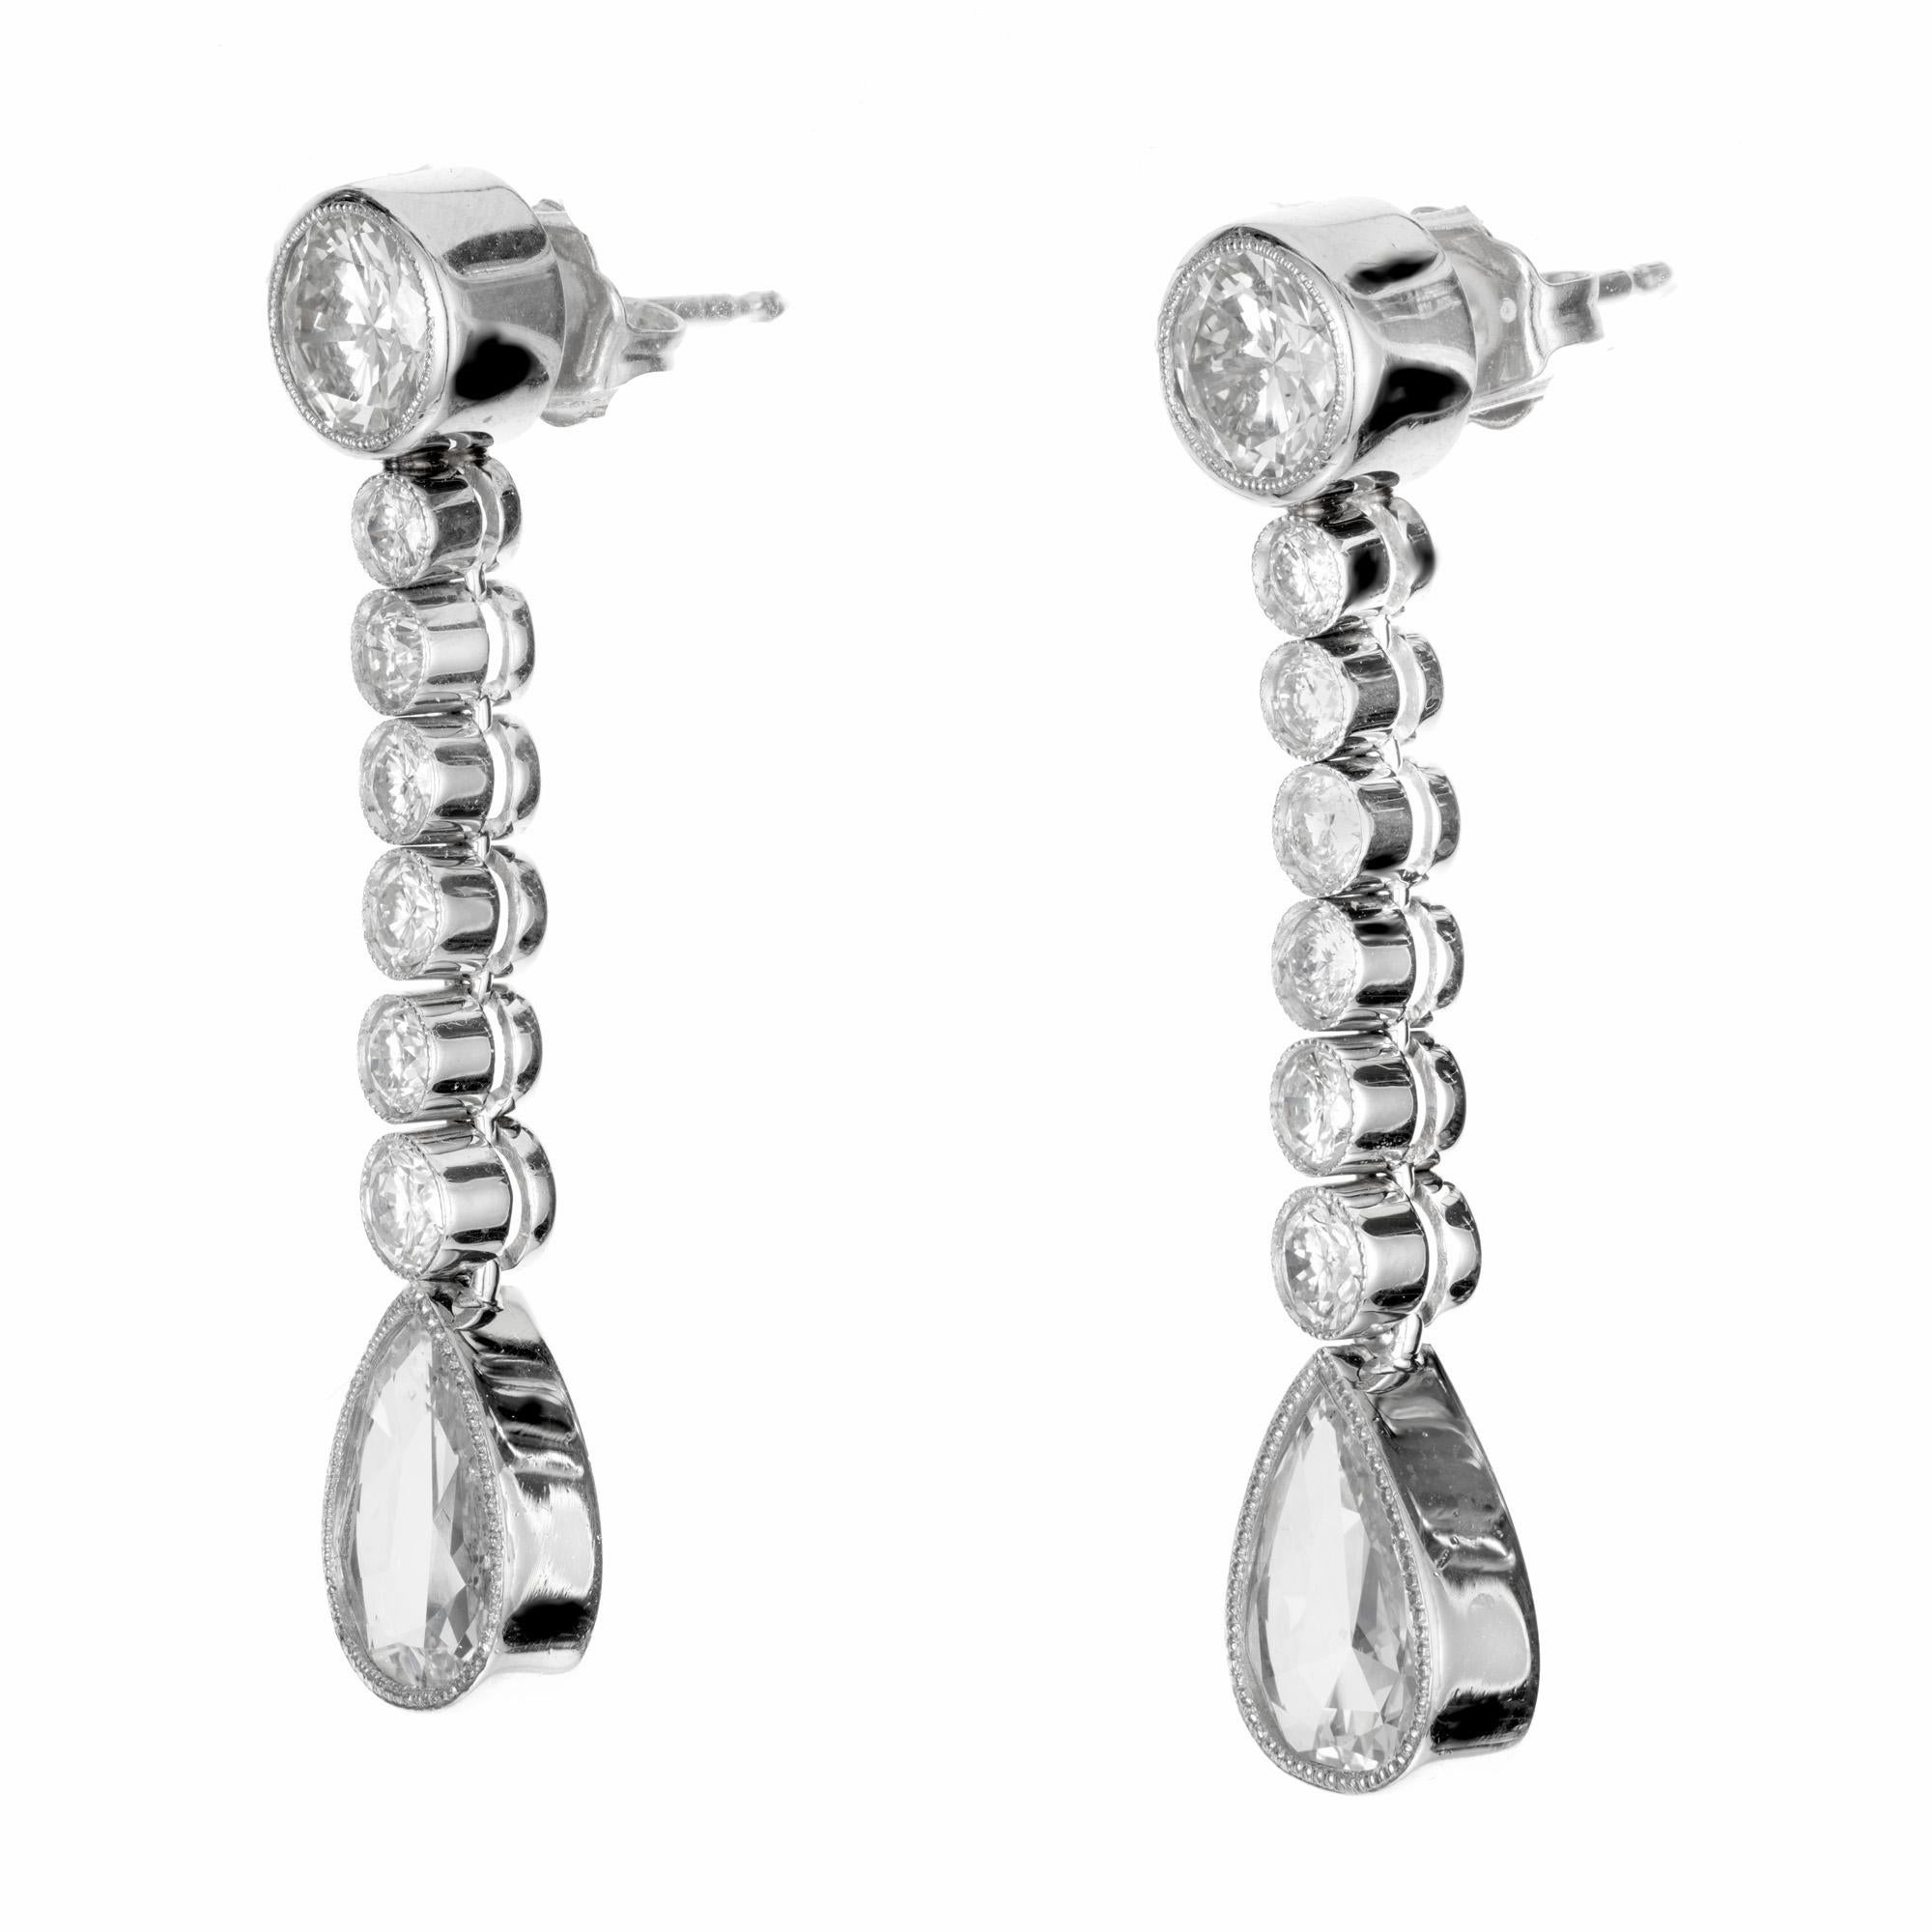 Diamond dangle drop earrings.  2 brilliant round cut beaded bezel set diamonds, 1.37cts total. Each with a row of 6 round cut diamonds totaling .48cts with two EGL certified pear shaped diamond at each end totaling 1.90cts. 

2 round diamonds,